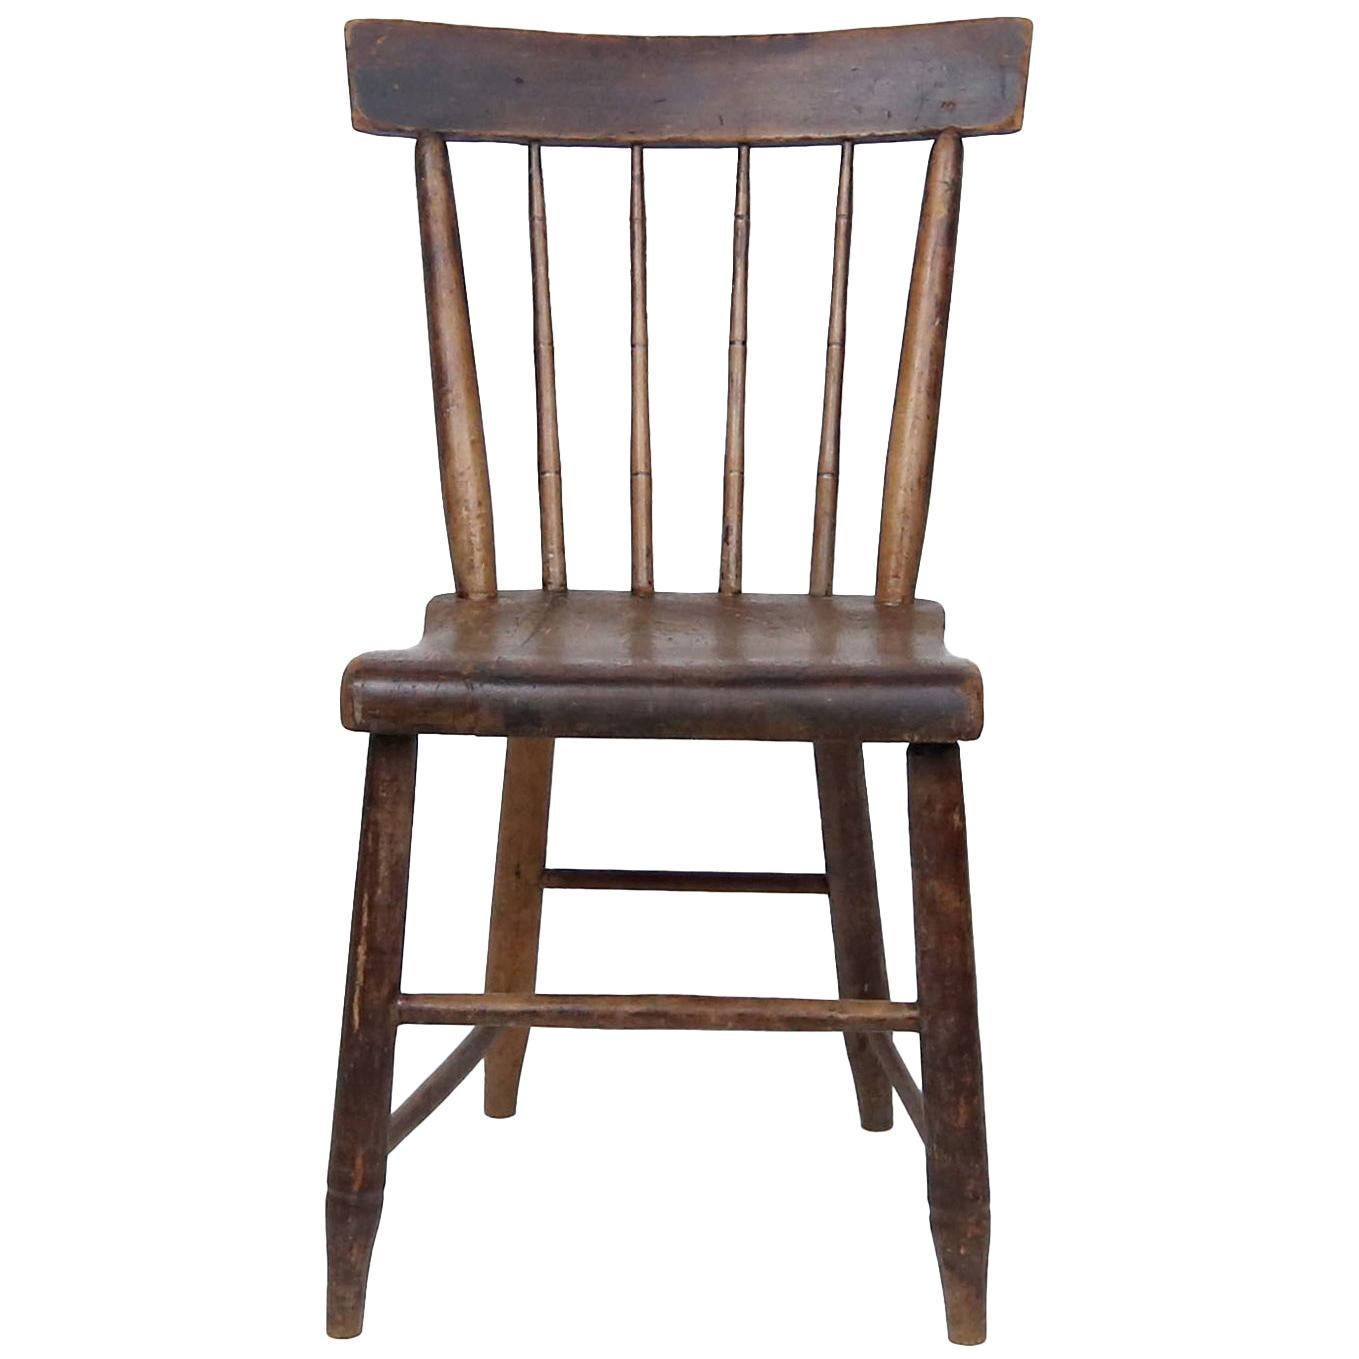 Early 19th Century American Windsor Chair For Sale